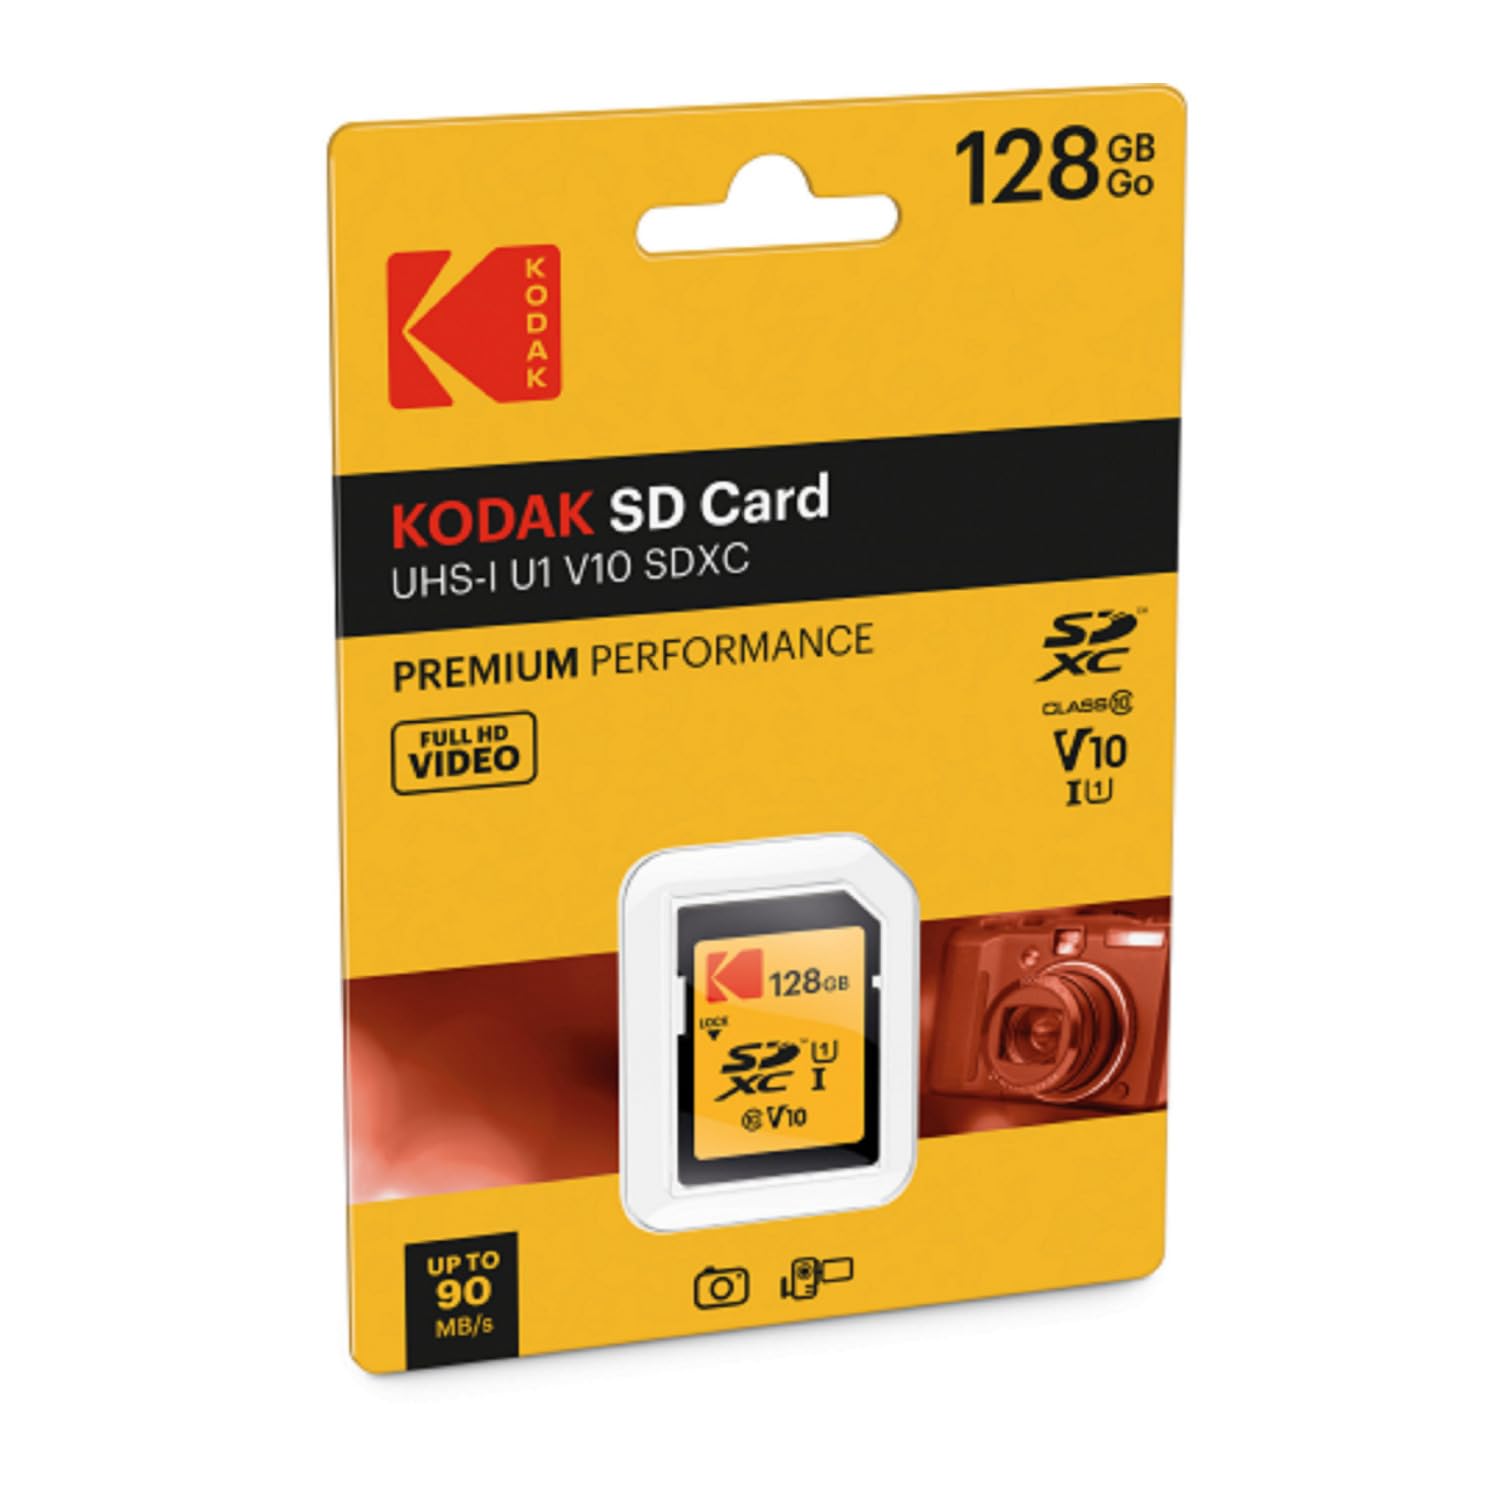 KODAK Premium Memory Card 128GB, 85MBs Read Speed, 25MBs Write Speed for Full HD Video and High-Resolution Pictures, Compatible with SDHC and SDXC Standards - EKMSD128GXC10K